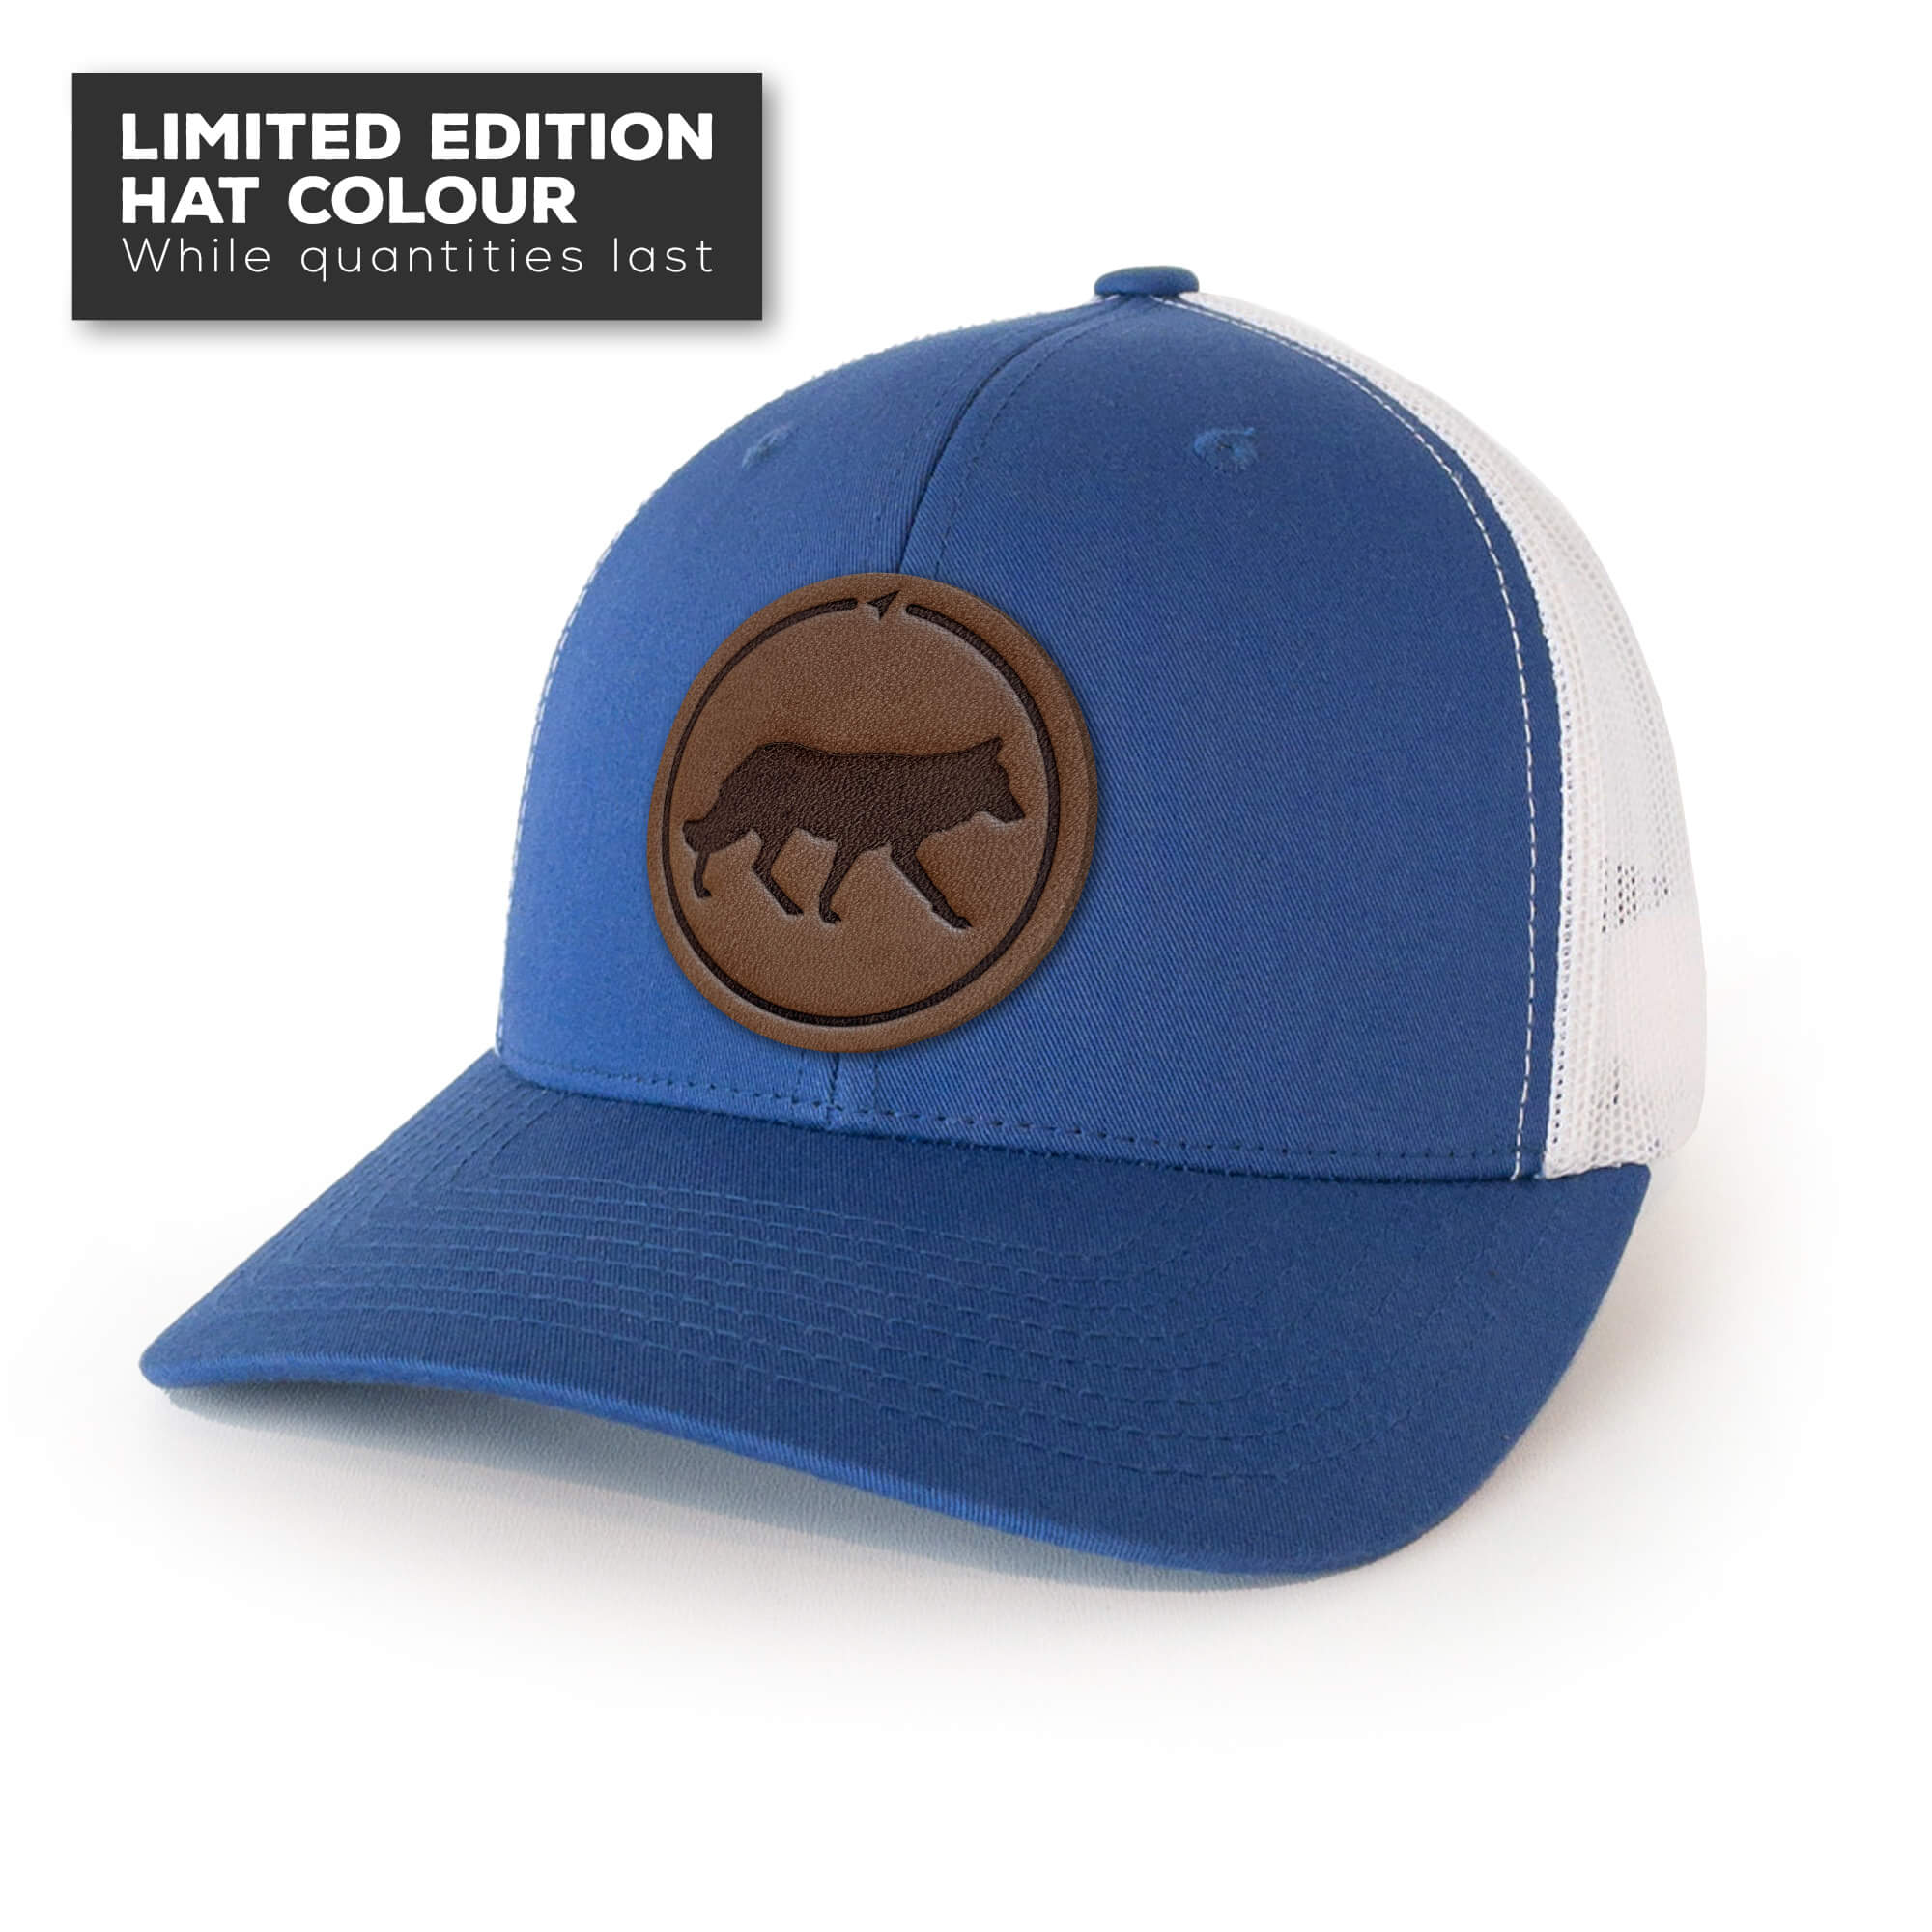 Royal Blue trucker hat with full-grain leather patch of Wolf